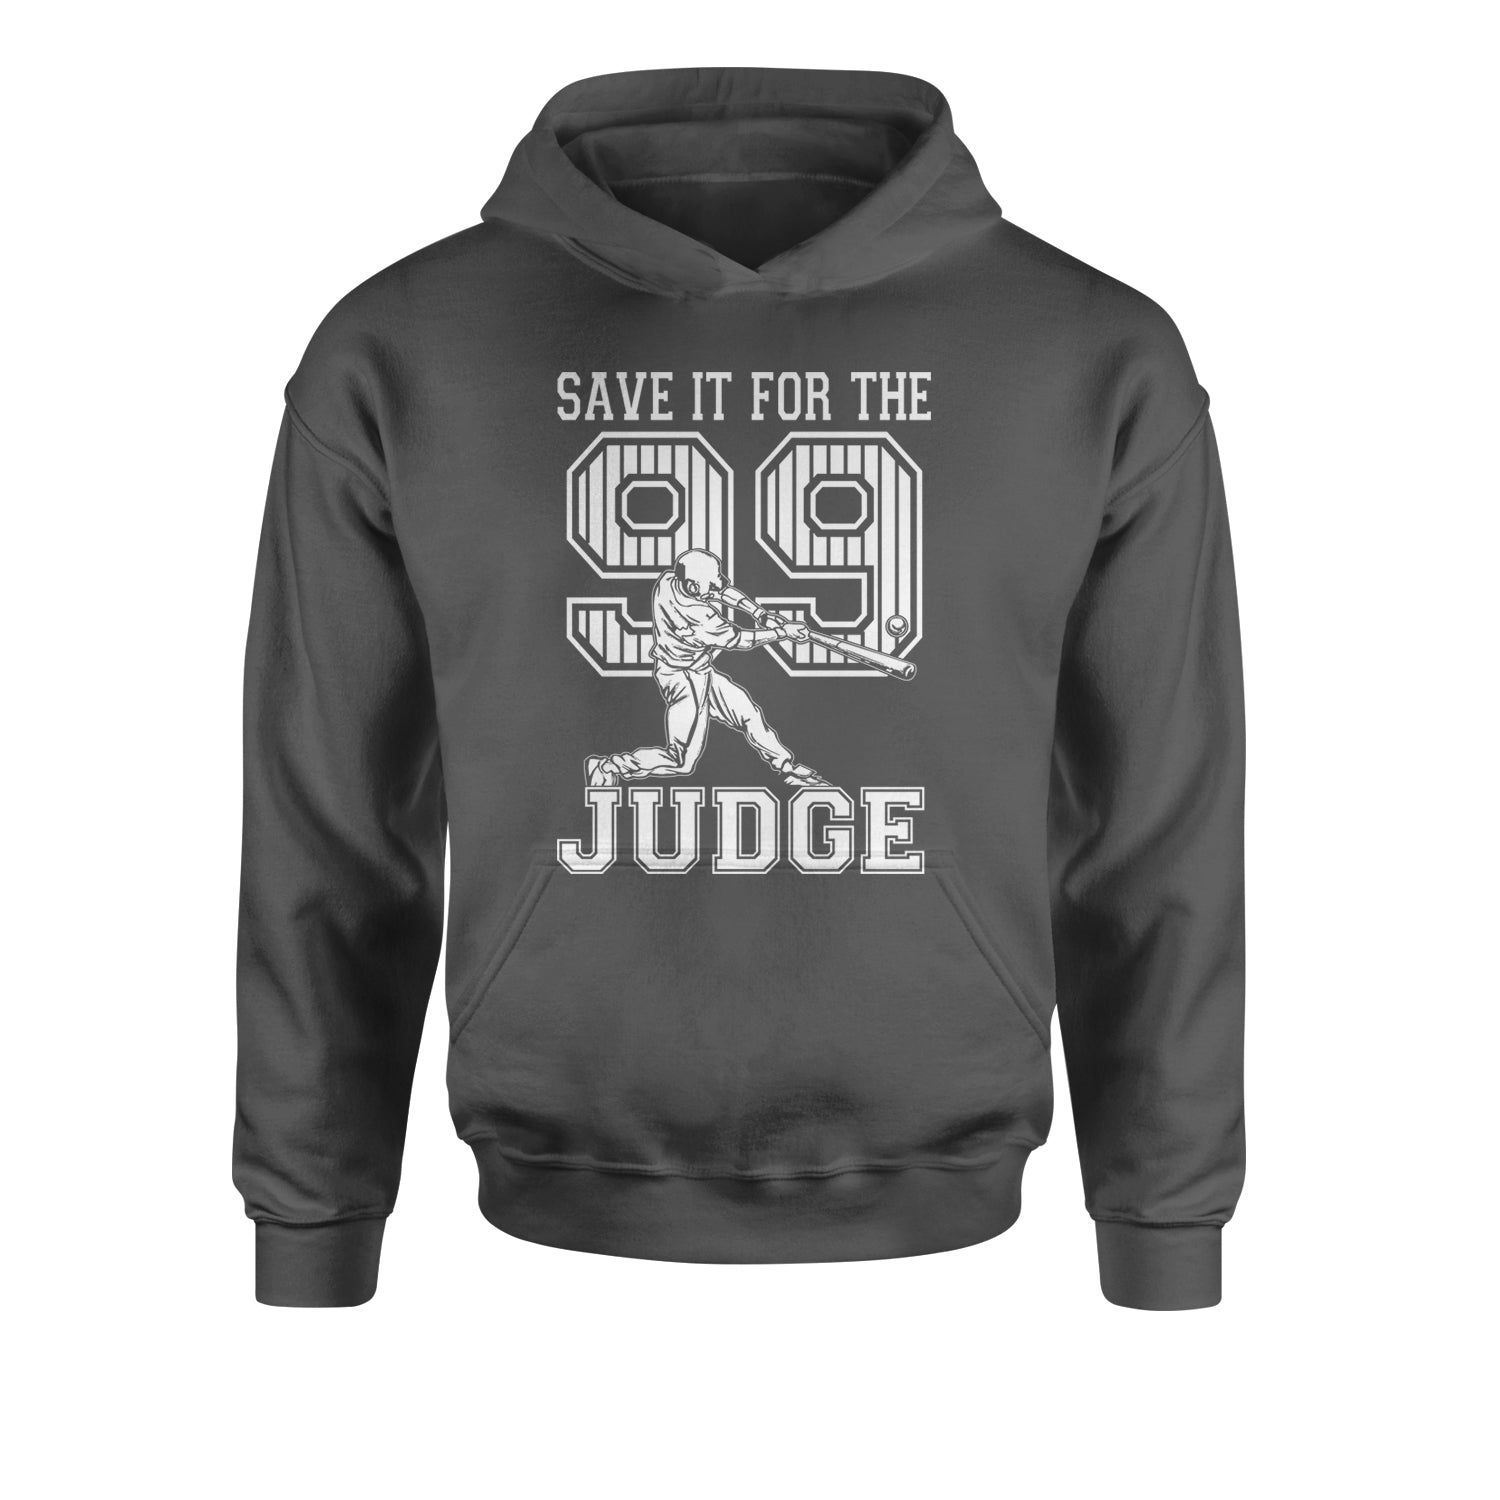 Expression Tees Save It for The Judge 99 Youth-Sized Hoodie - Tie-Dye Cotton Candy Medium